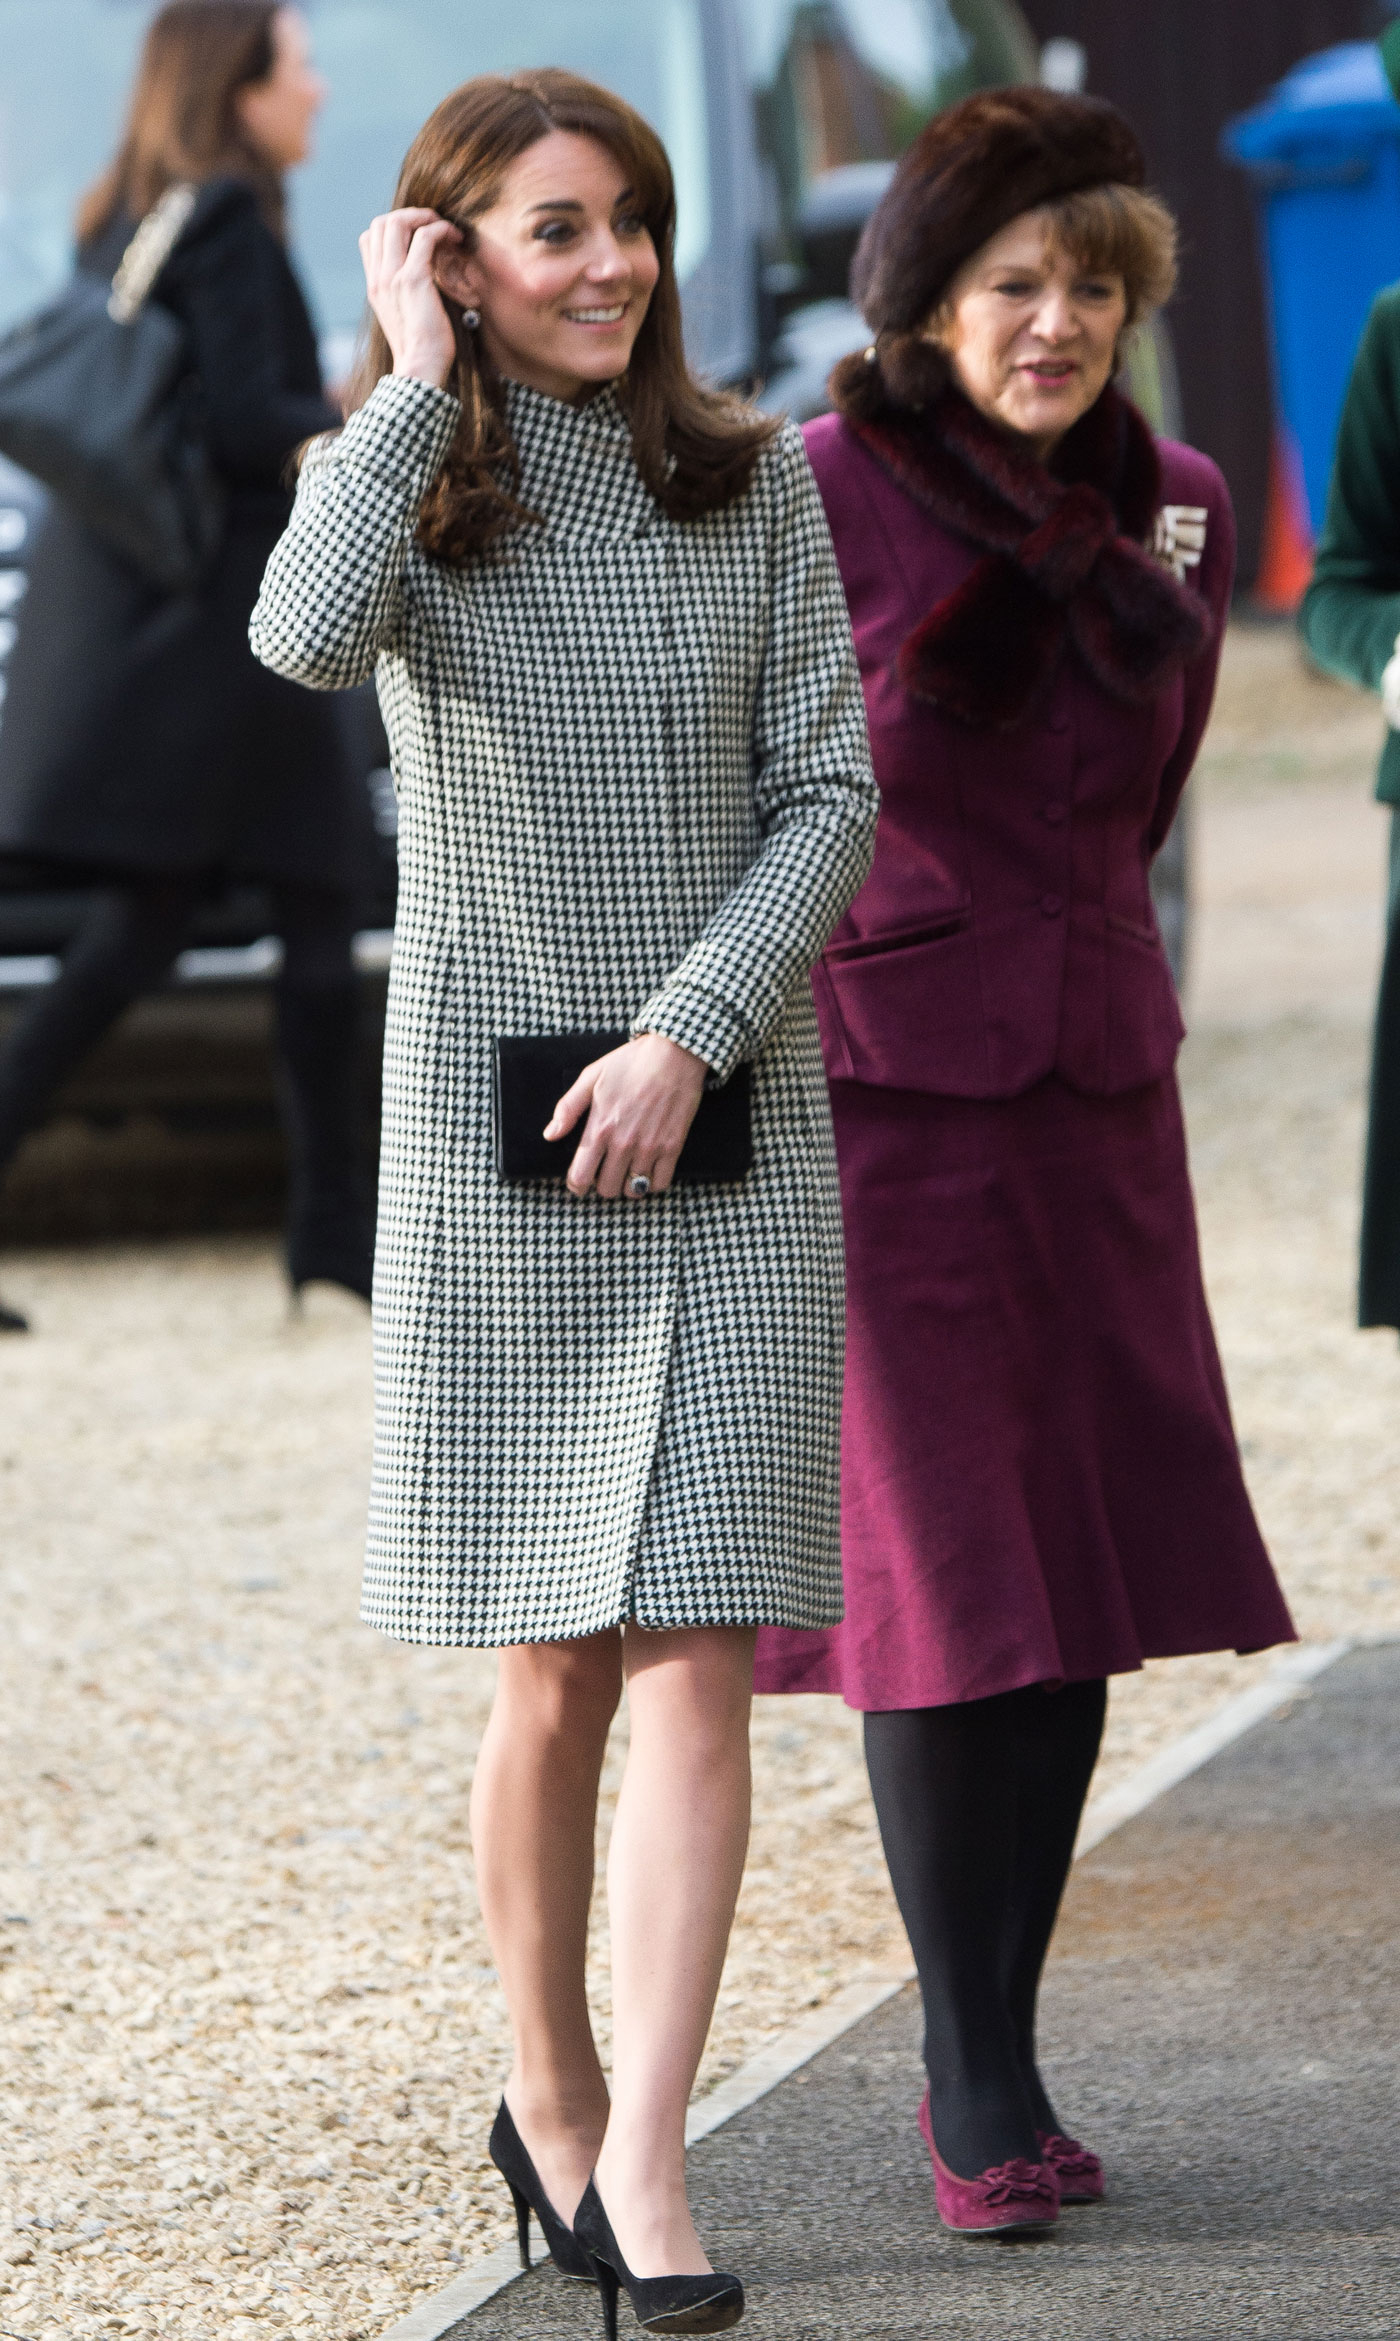 Kate Middleton Looks Chic in Black and White at Function: Pics